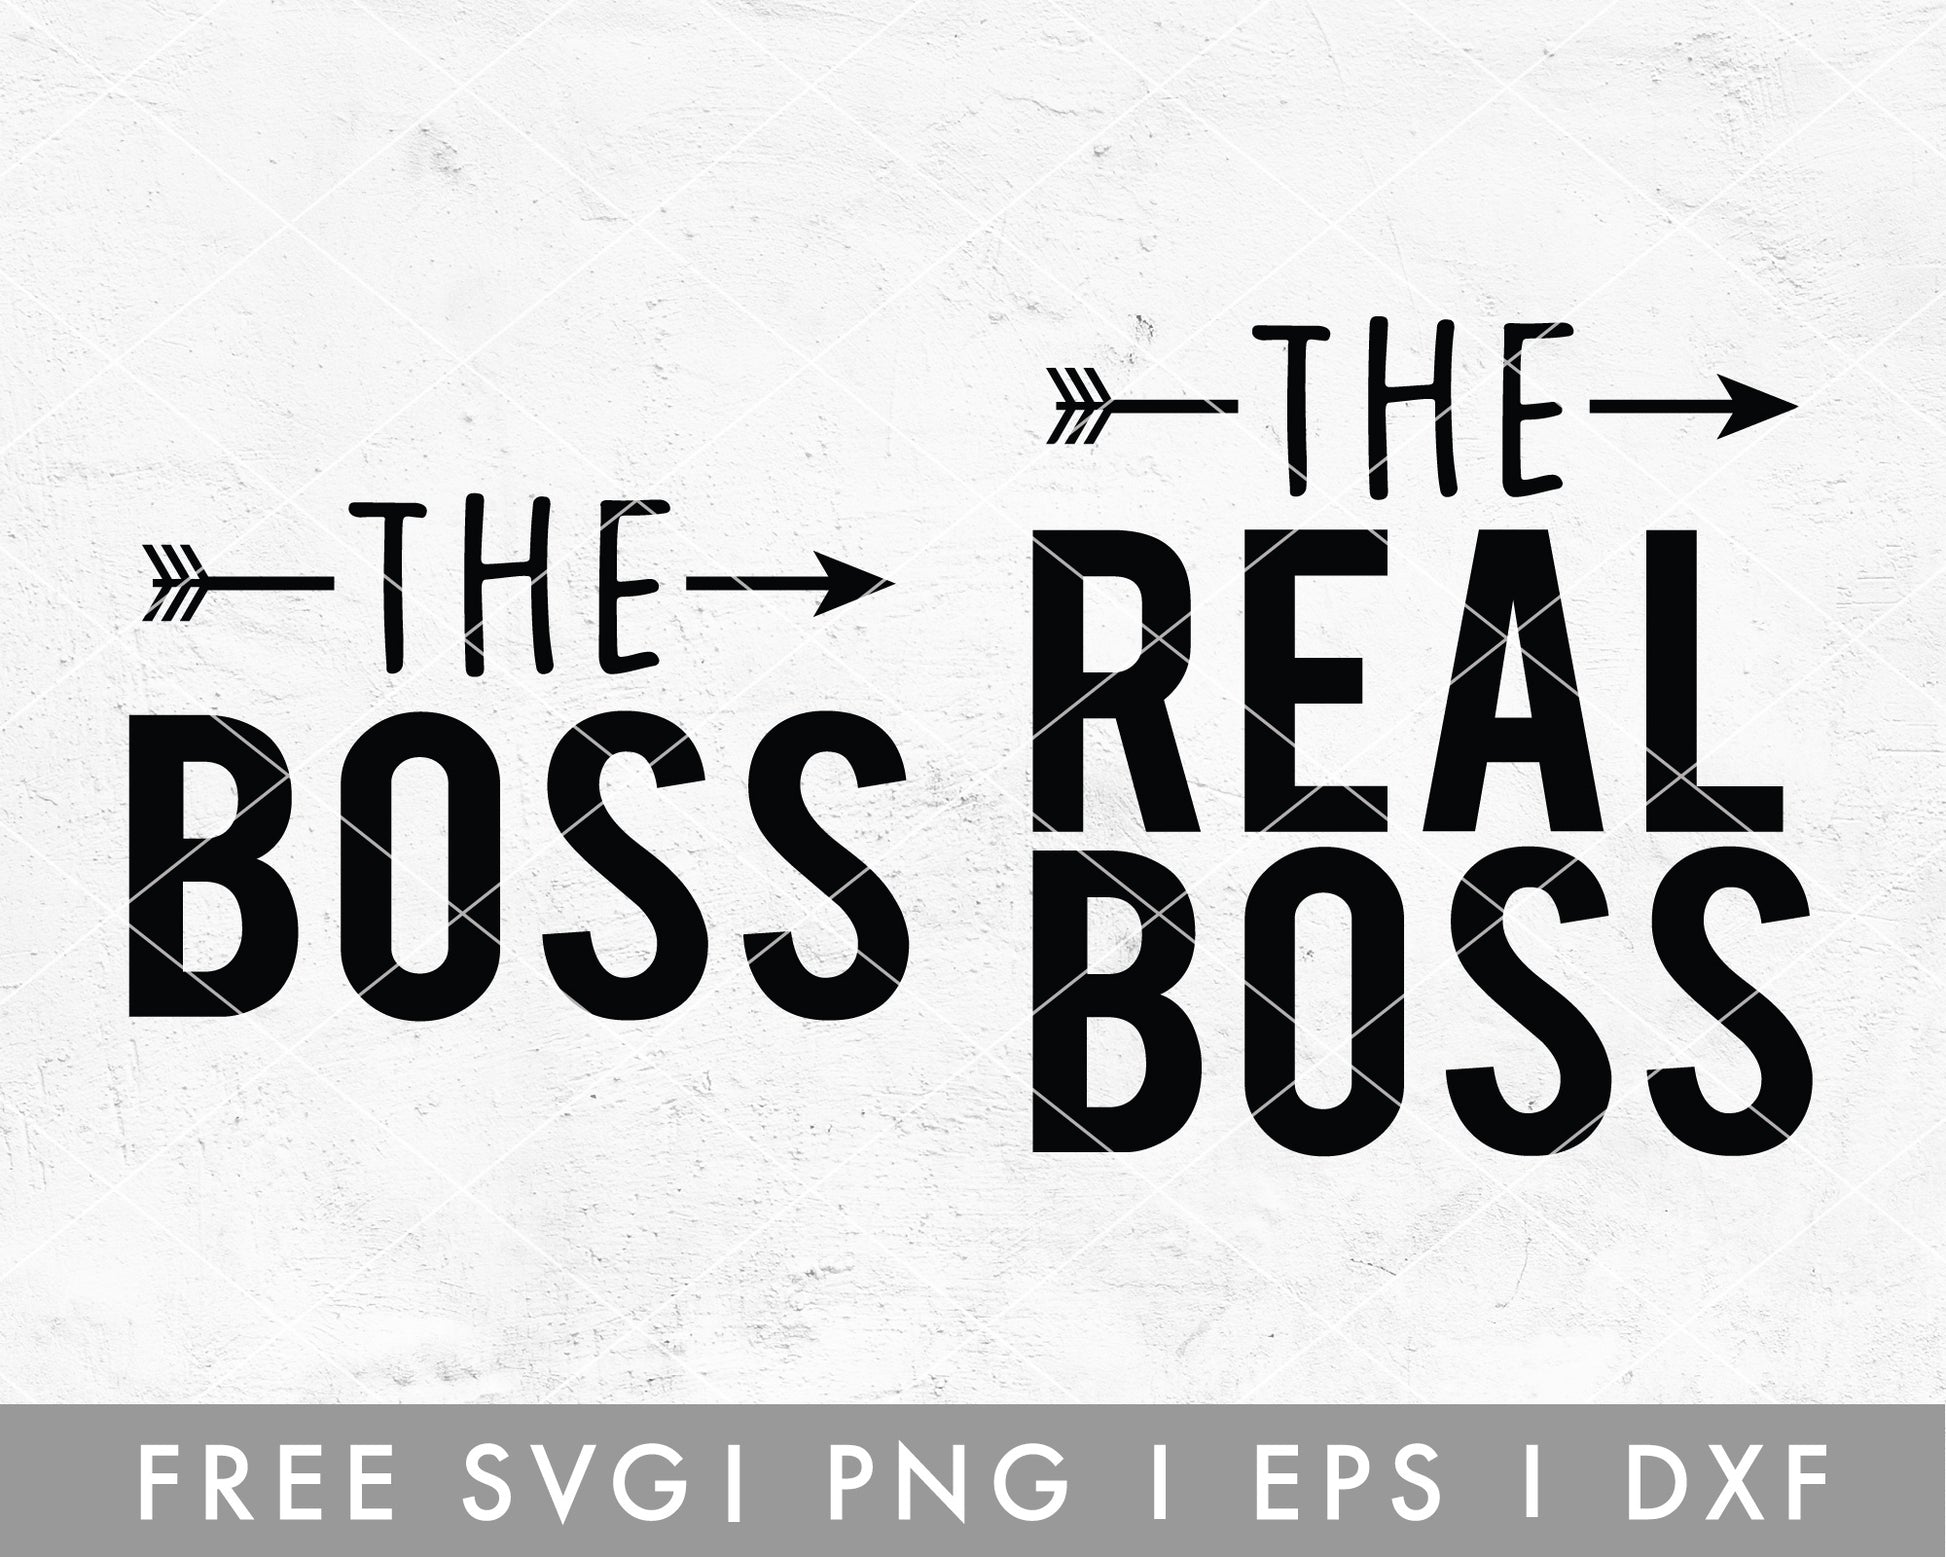 FREE The Boss The Real Boss SVG Cut File for Cricut, Cameo Silhouette | Free SVG Cut File